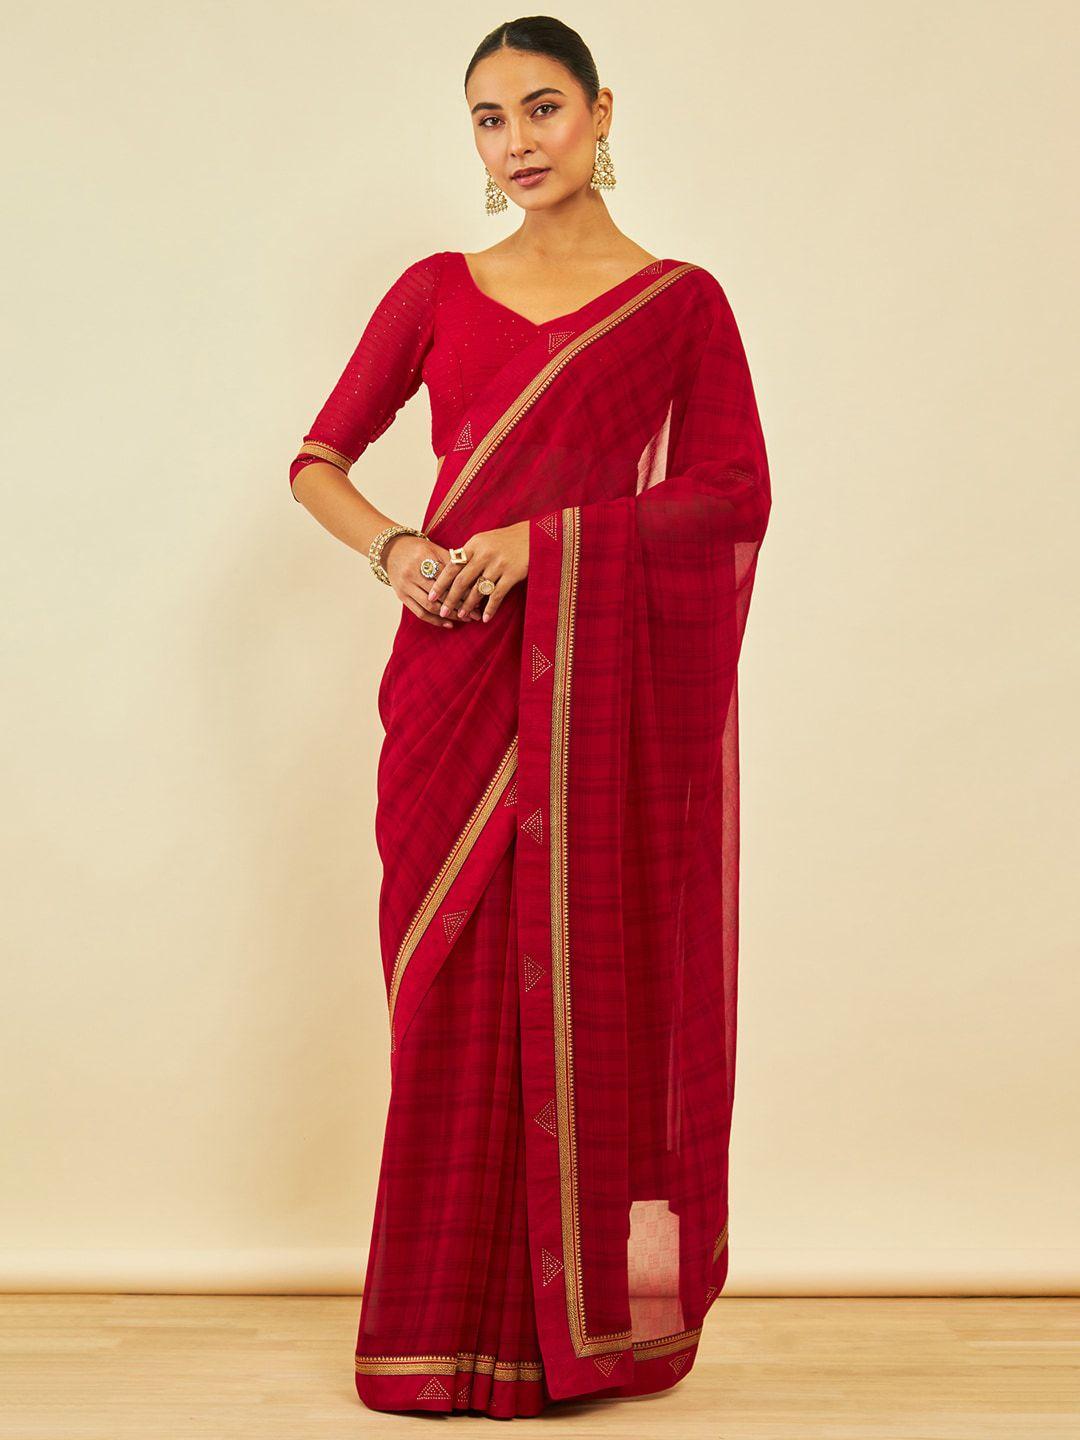 soch-checked-beads-and-stones-saree